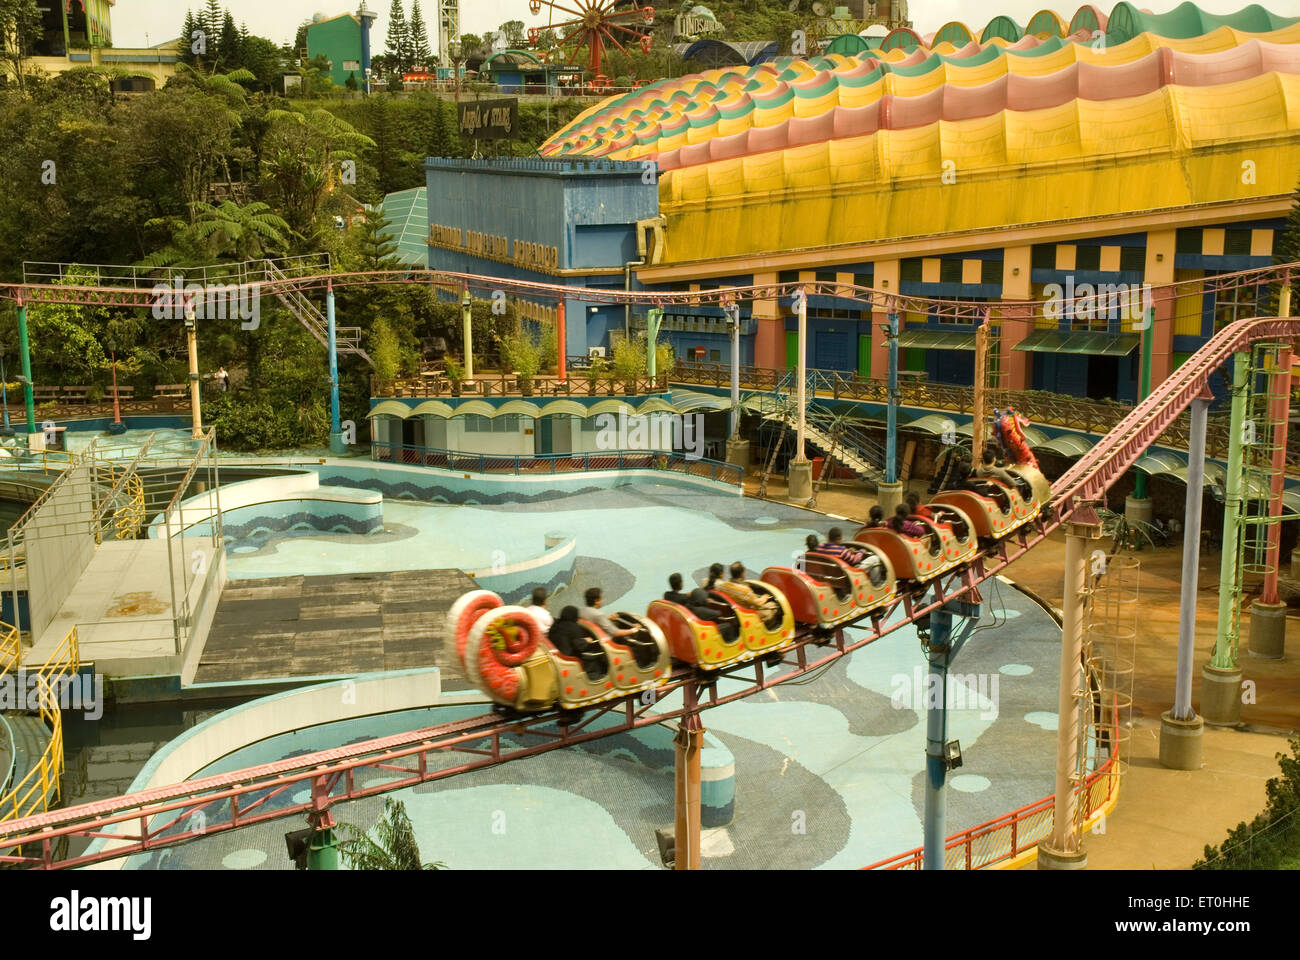 Genting outdoor theme park ticket price